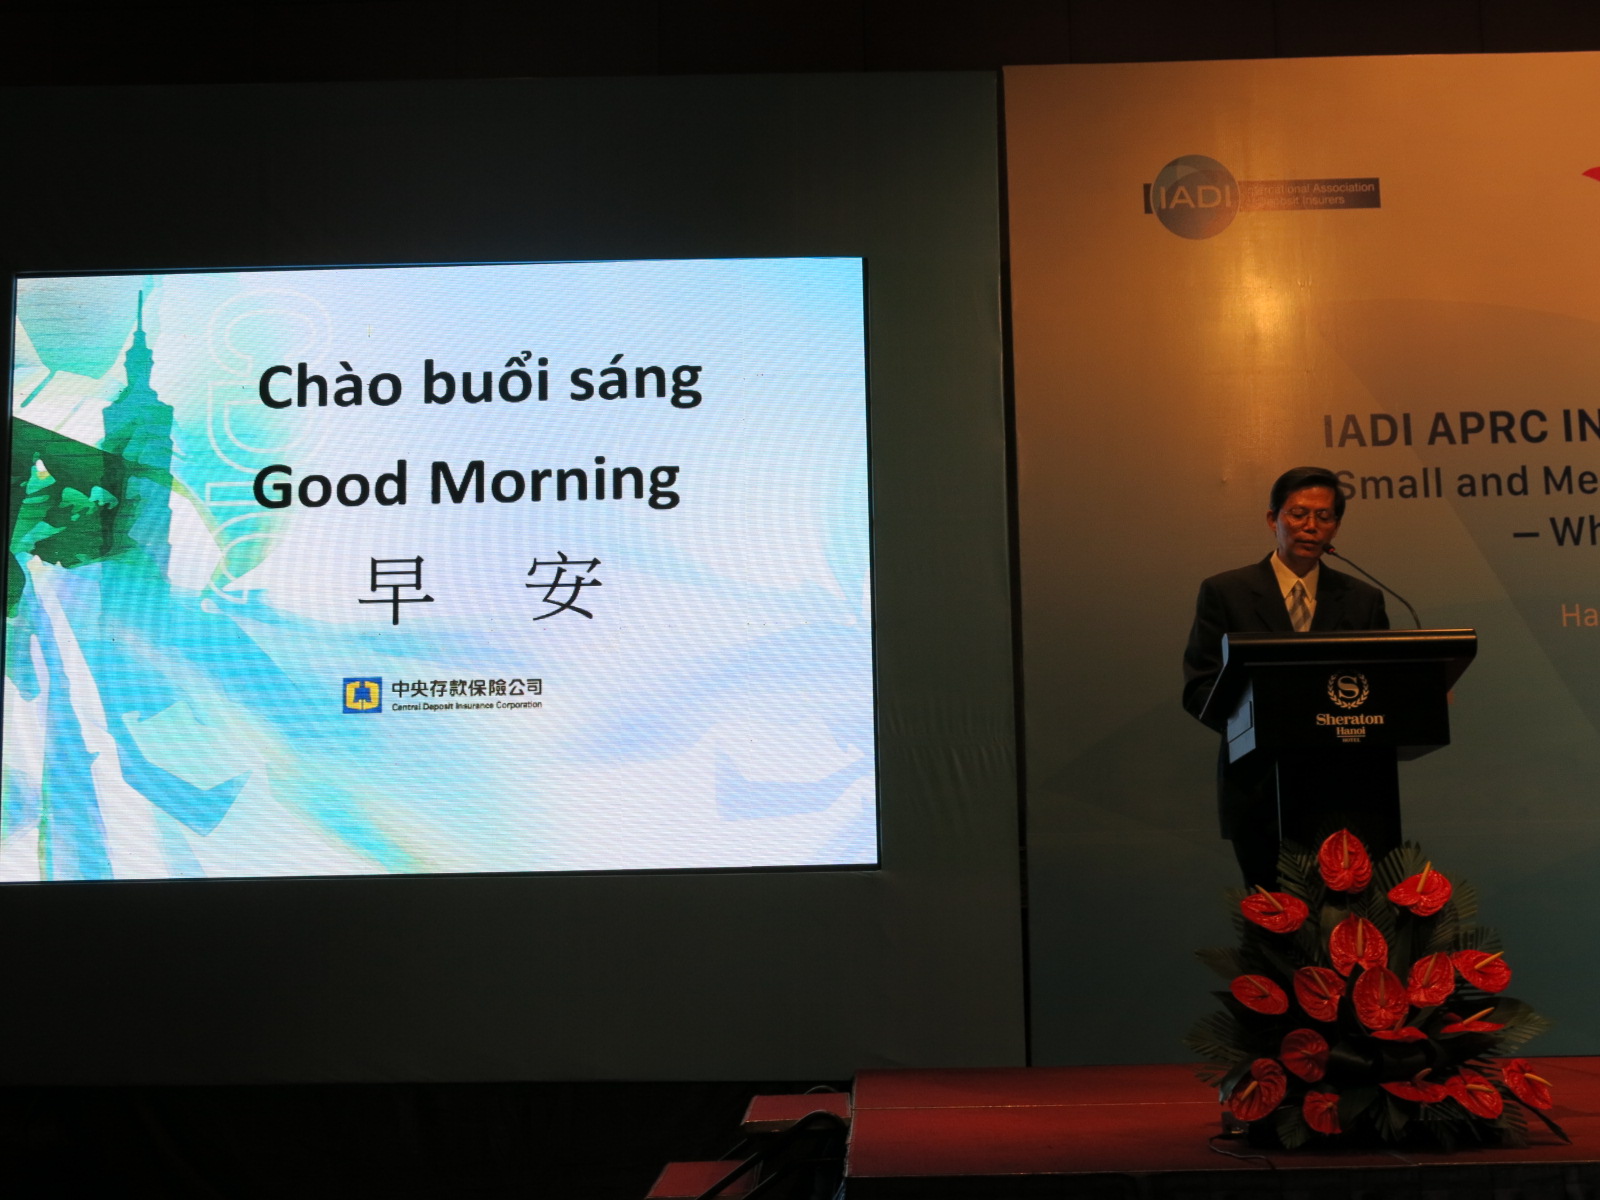 CDIC EVP William Su was invited to deliver opening remarks at the IADI APRC International Conference.